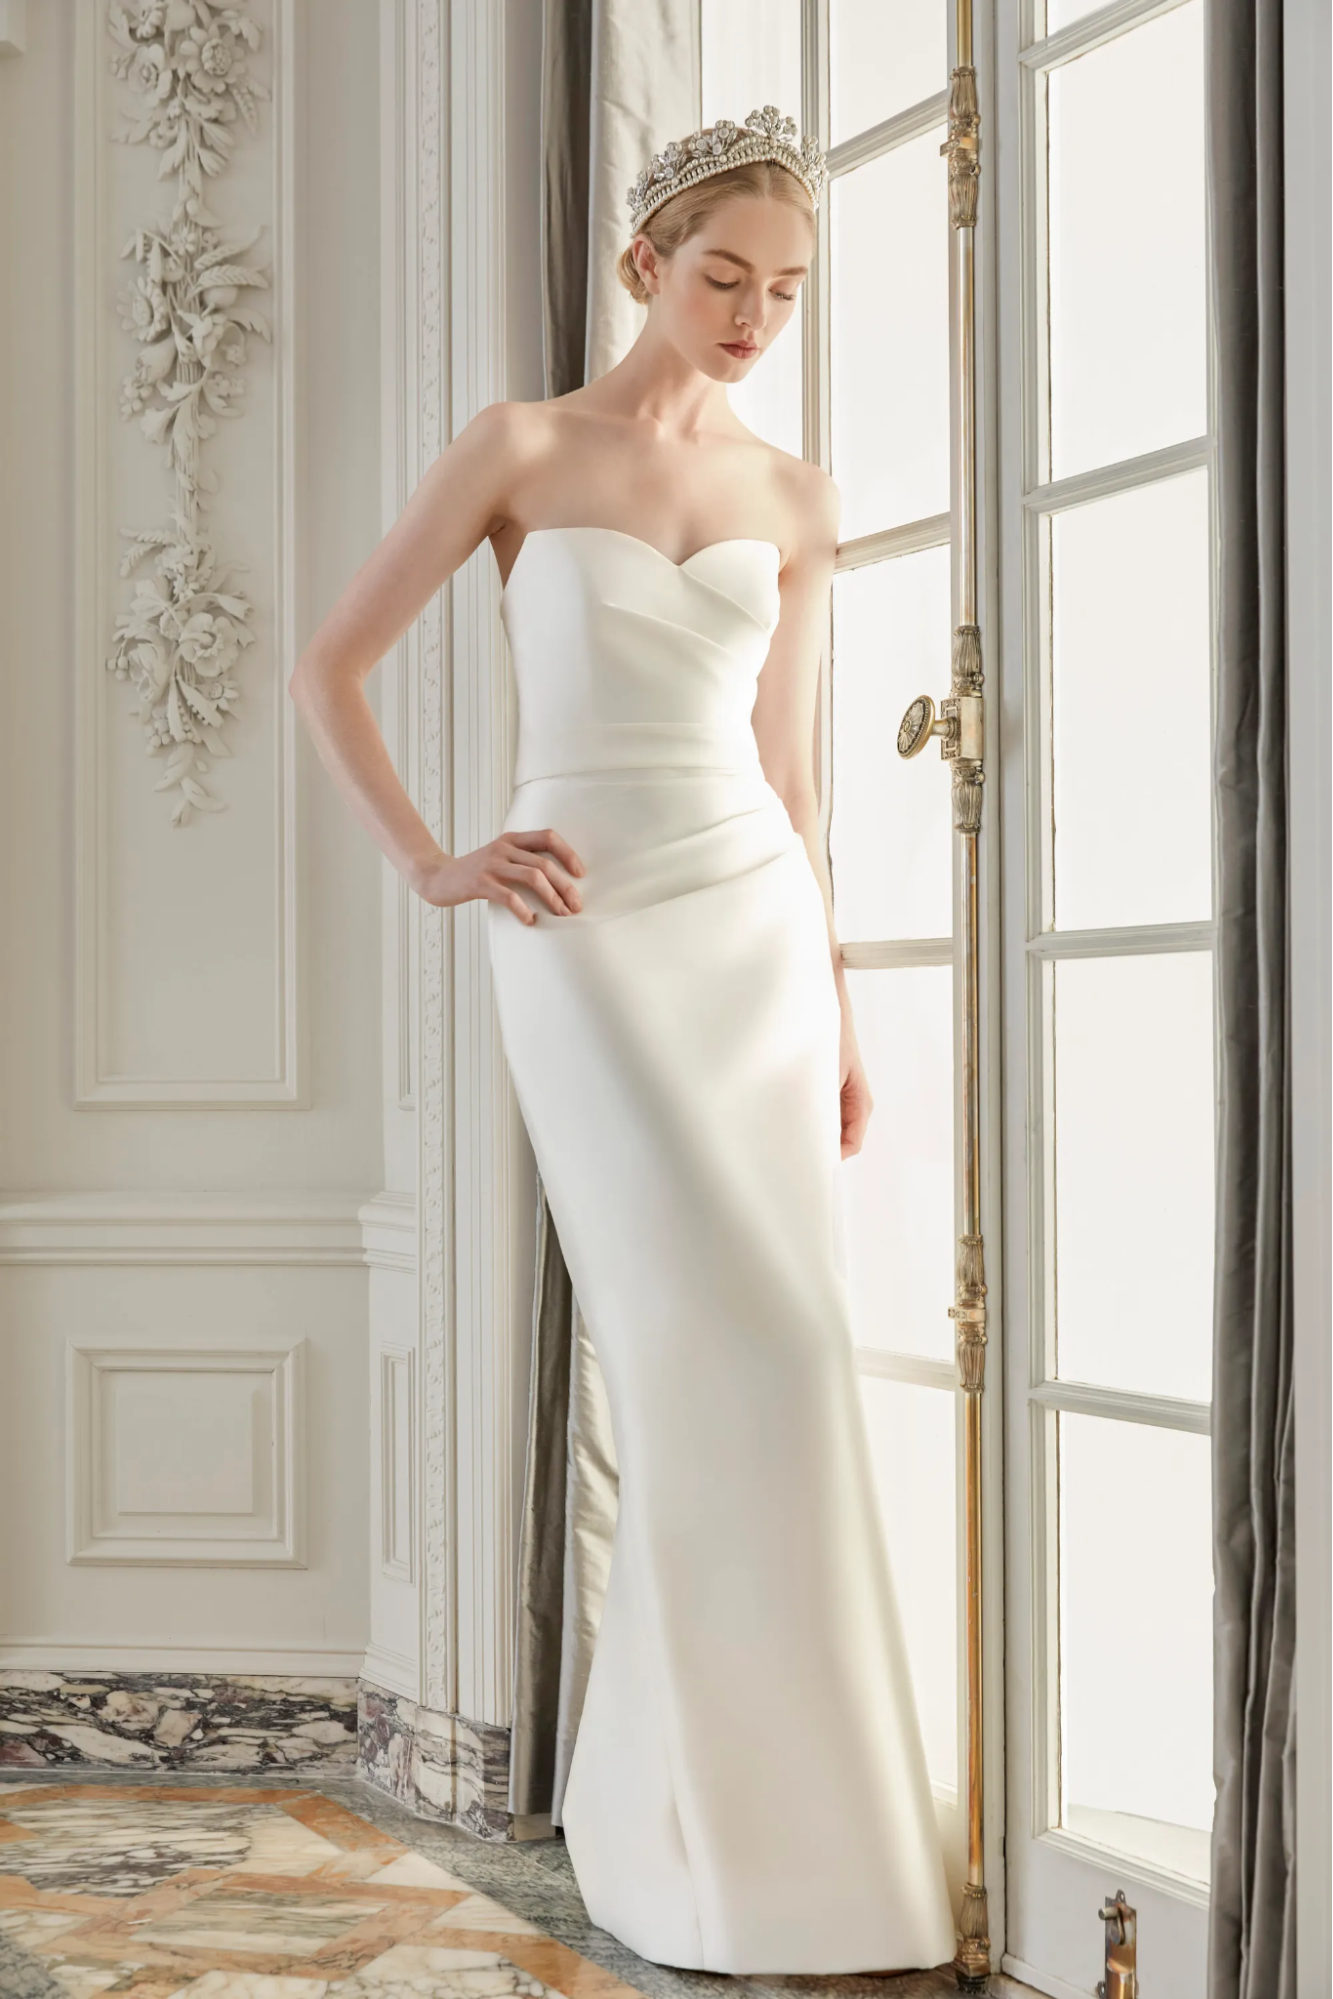 Two Looks in One: Wedding Dresses with Detachable Skirts/Sleeves